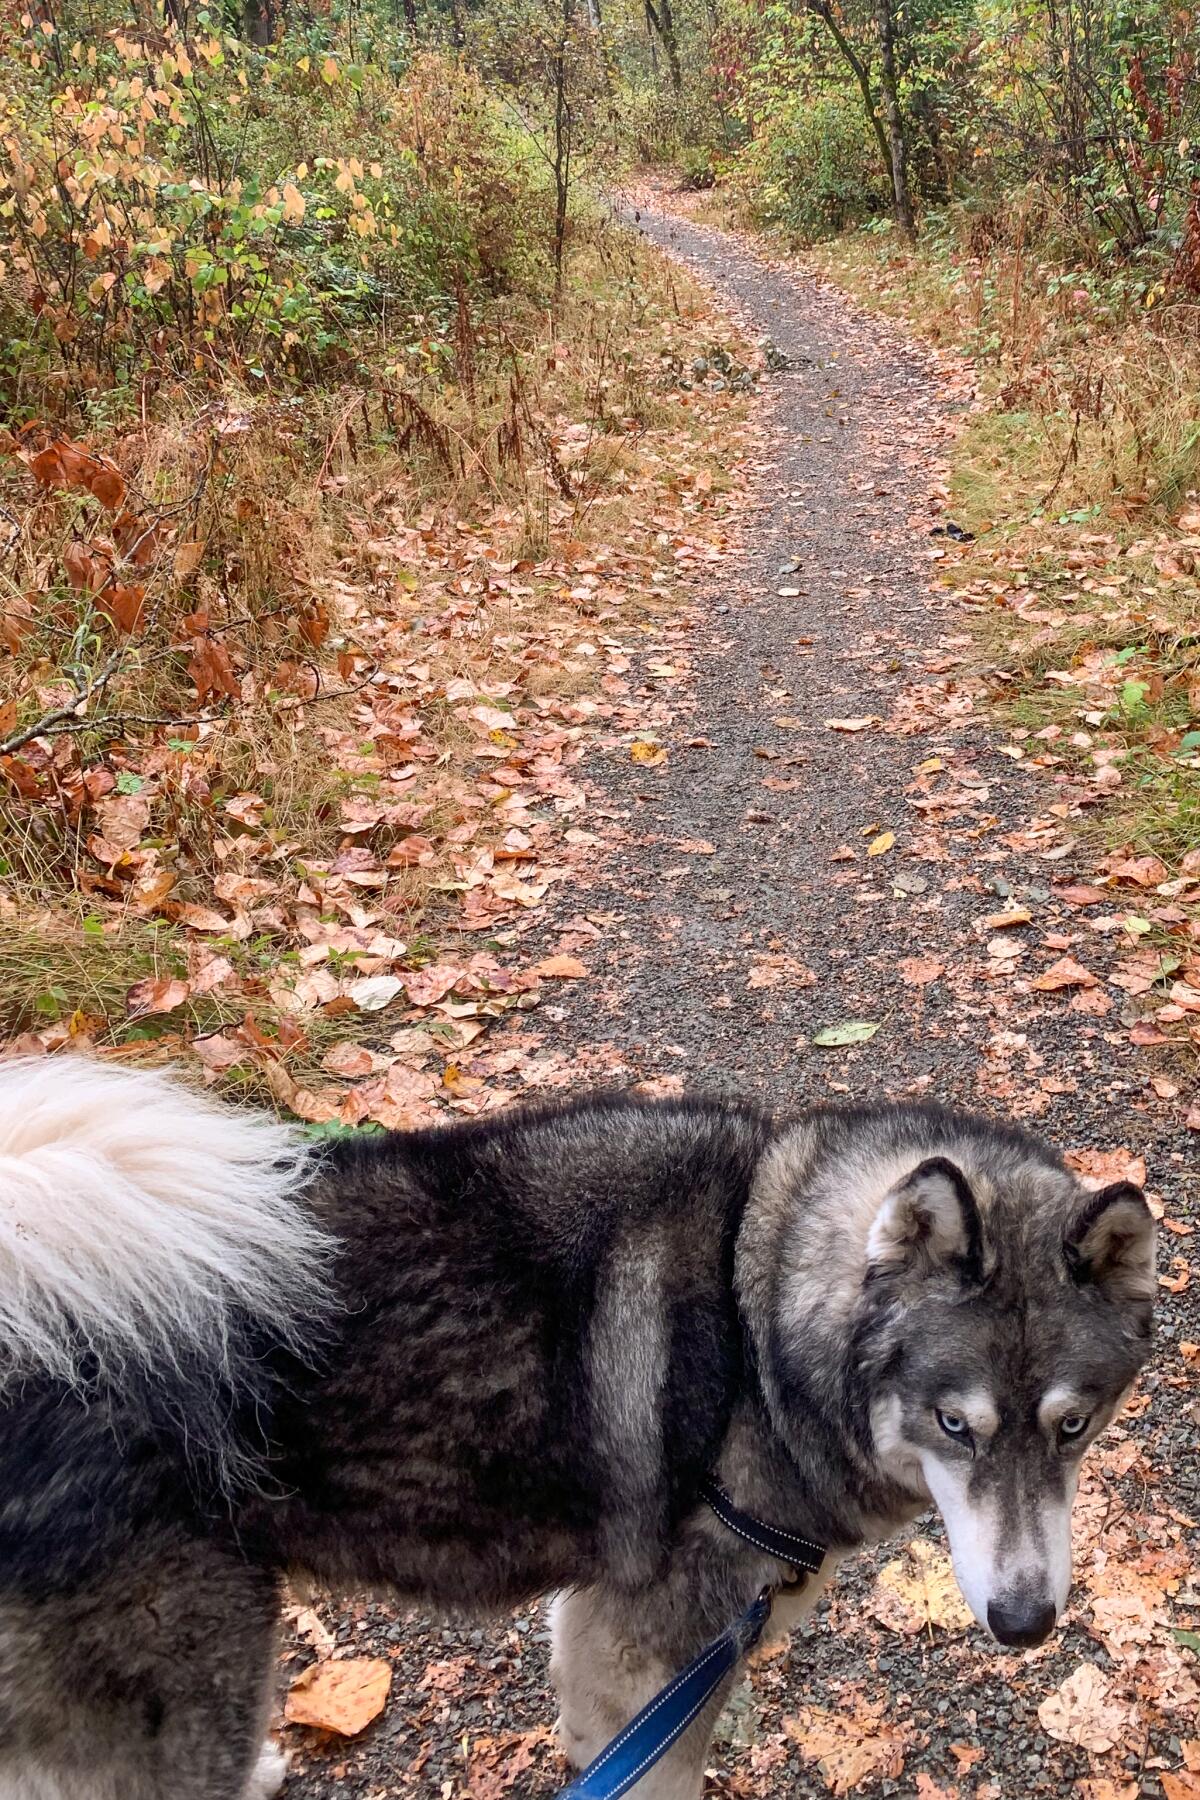 A black and white dog on a path strewn with leaves.